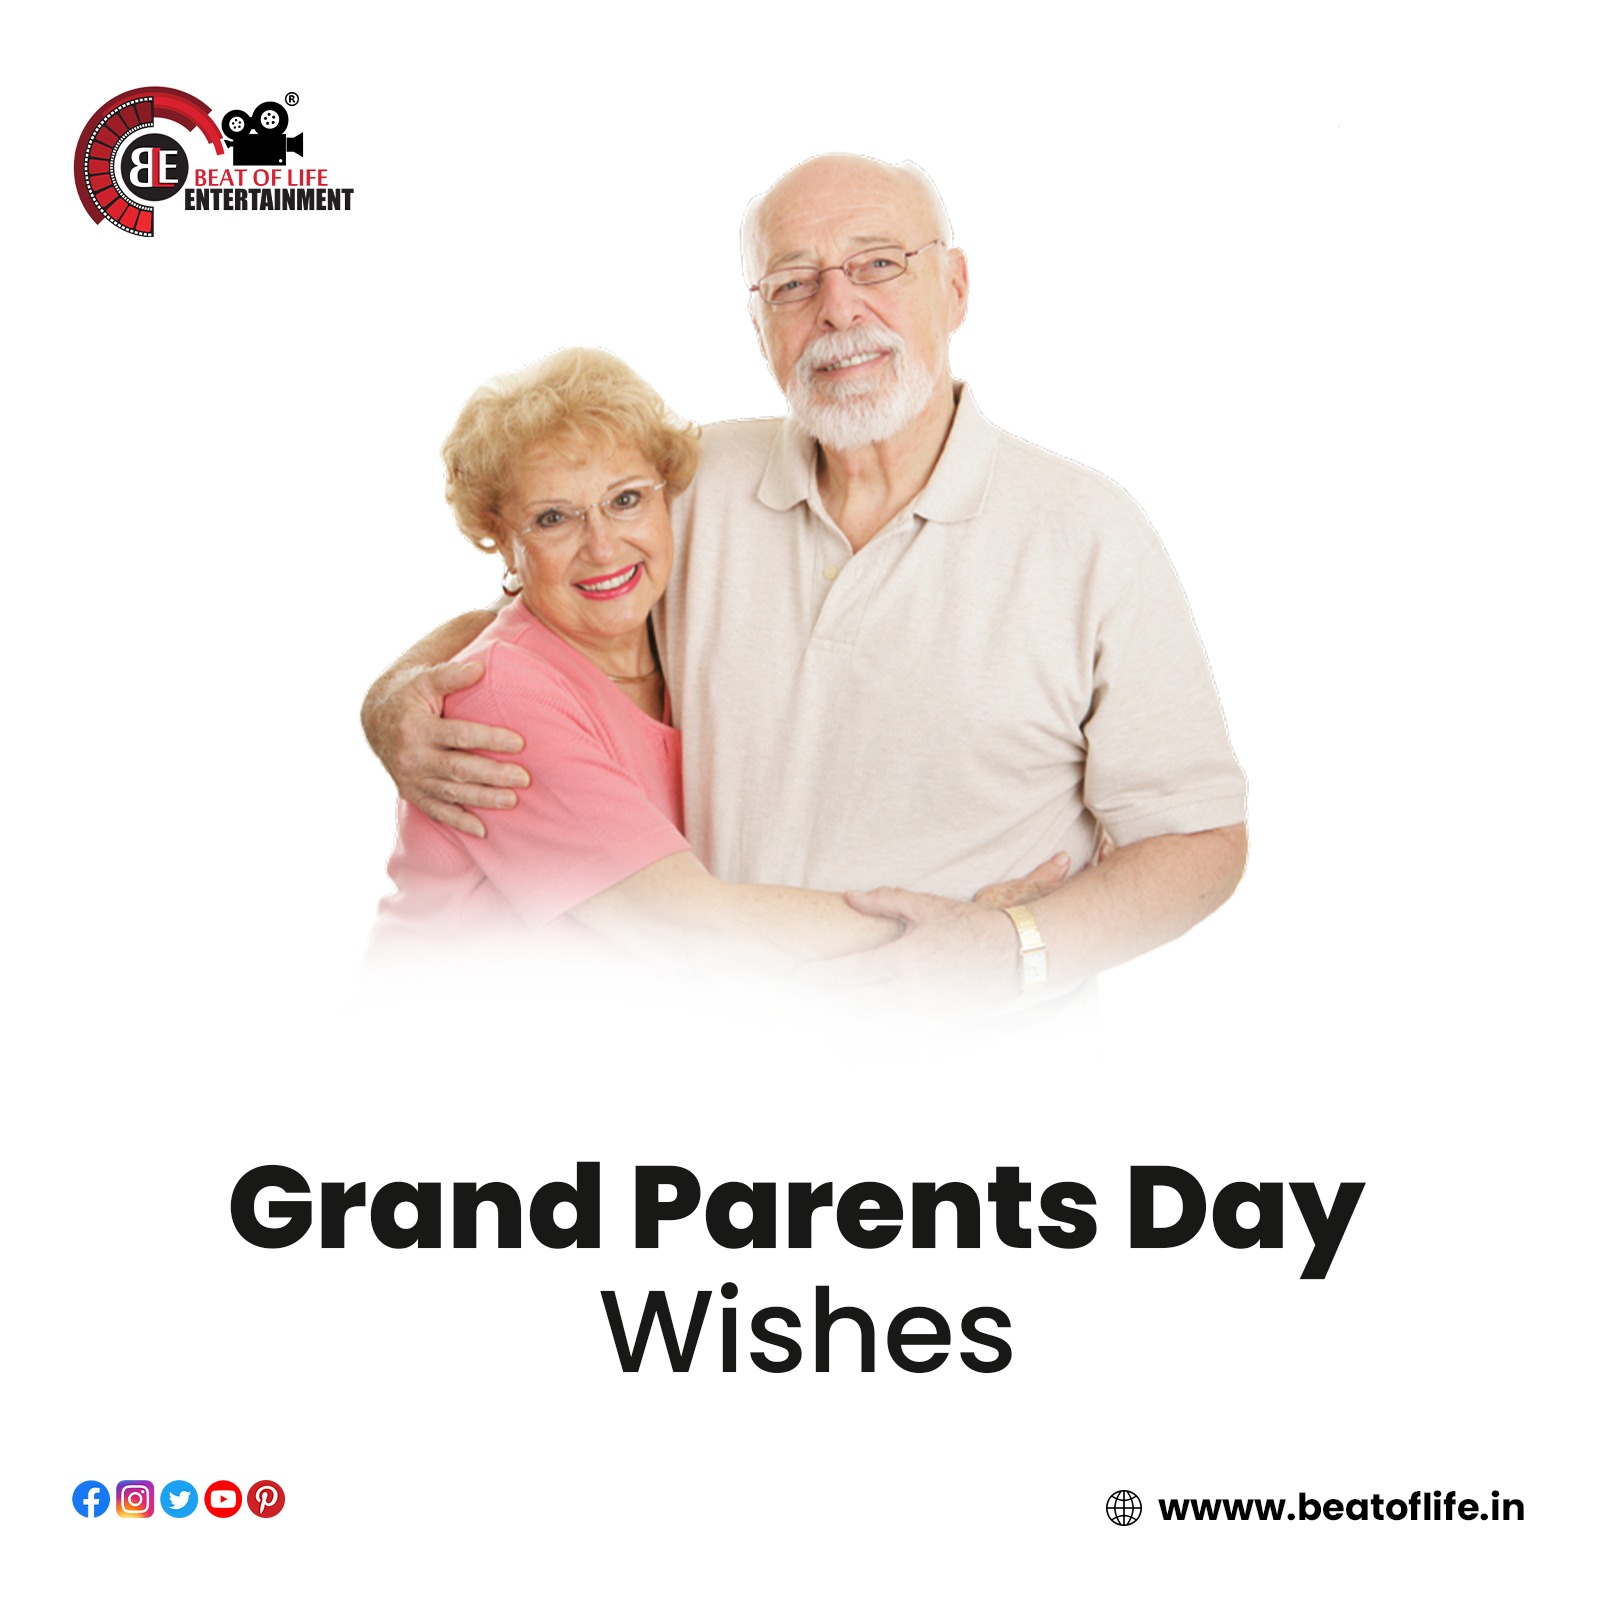 Grandparents Day Wishes